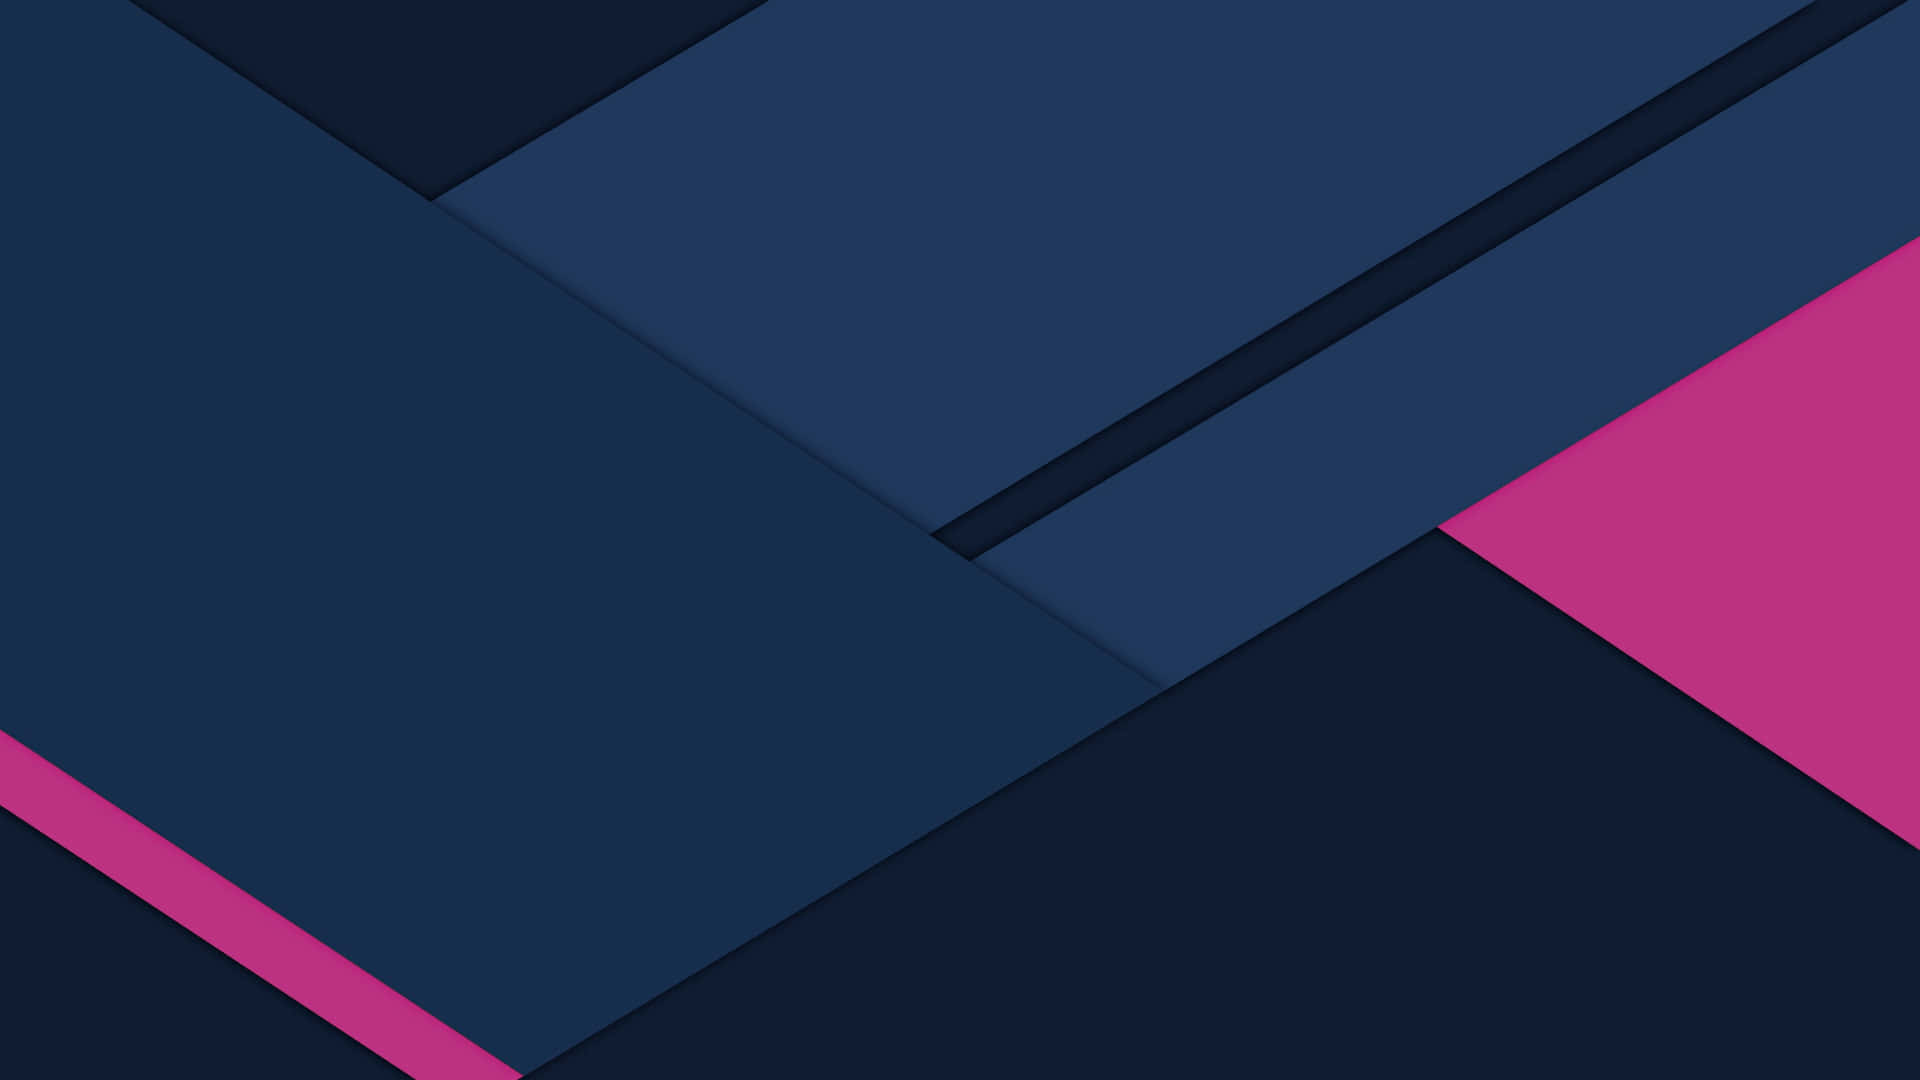 A Blue And Pink Background With A Square Shape